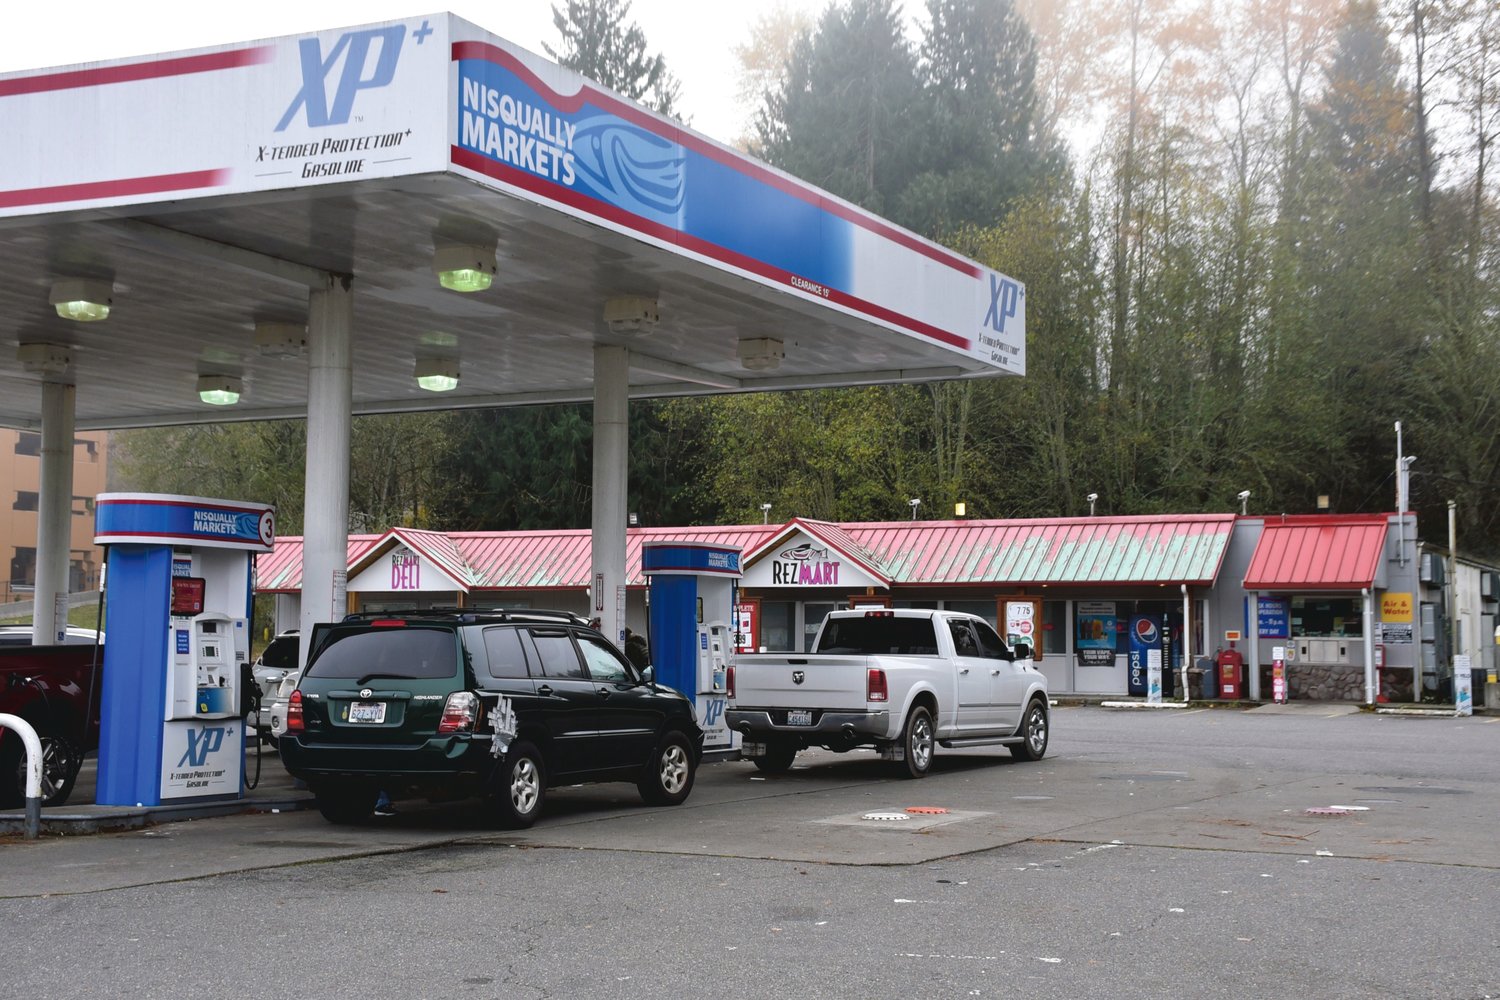 Medicine Creek Enterprises' Rez Mart will get a new location, at the roundabout where Yelm Highway and state Route 510 meet.